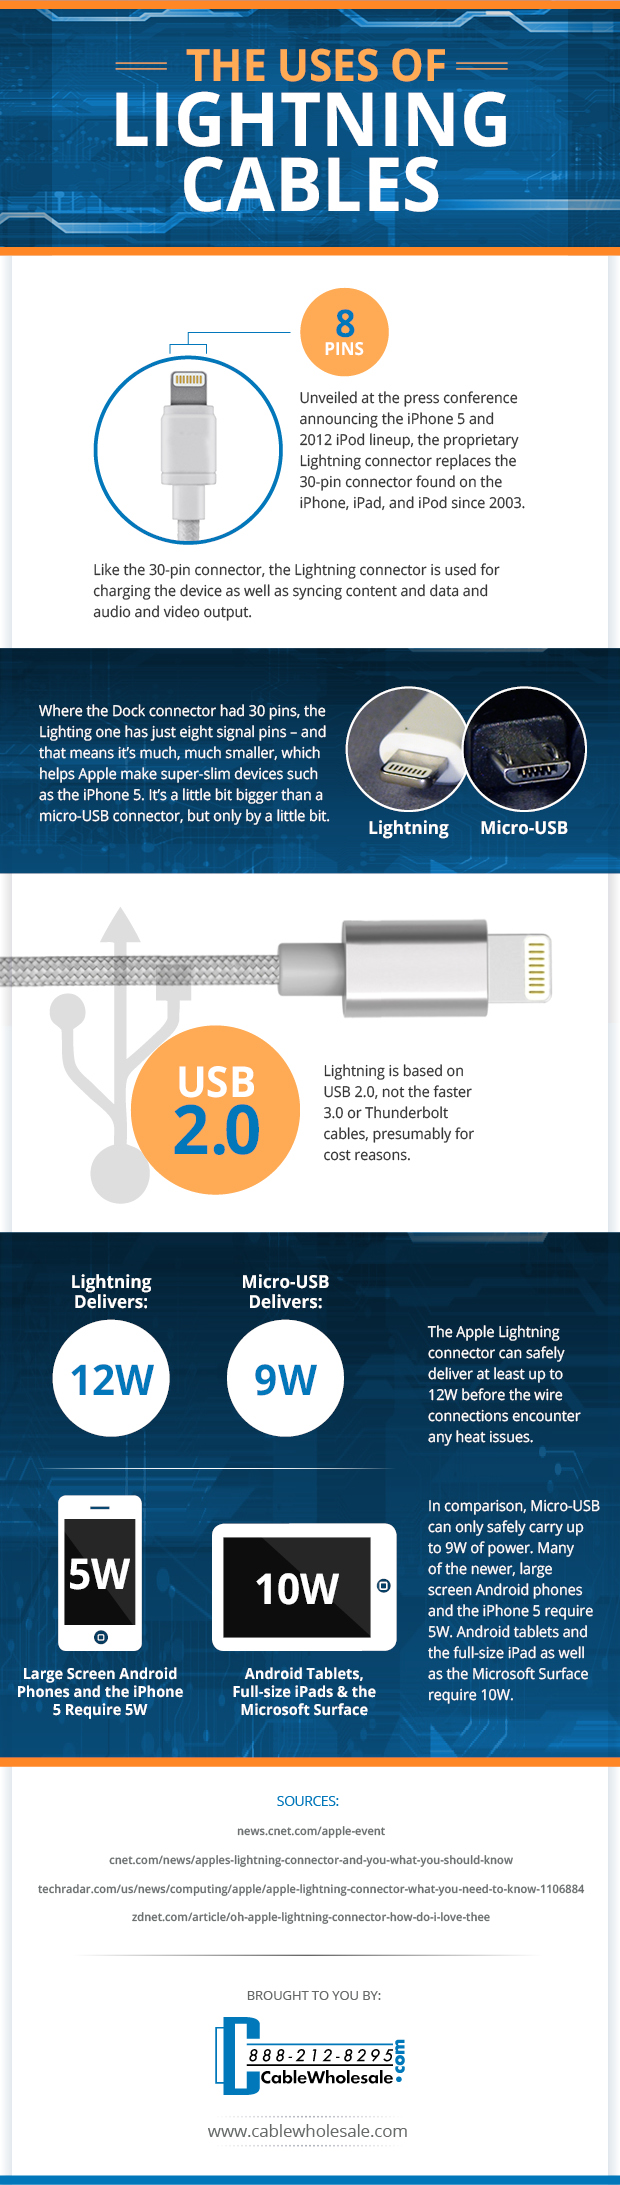 The Uses of Lightning Cables